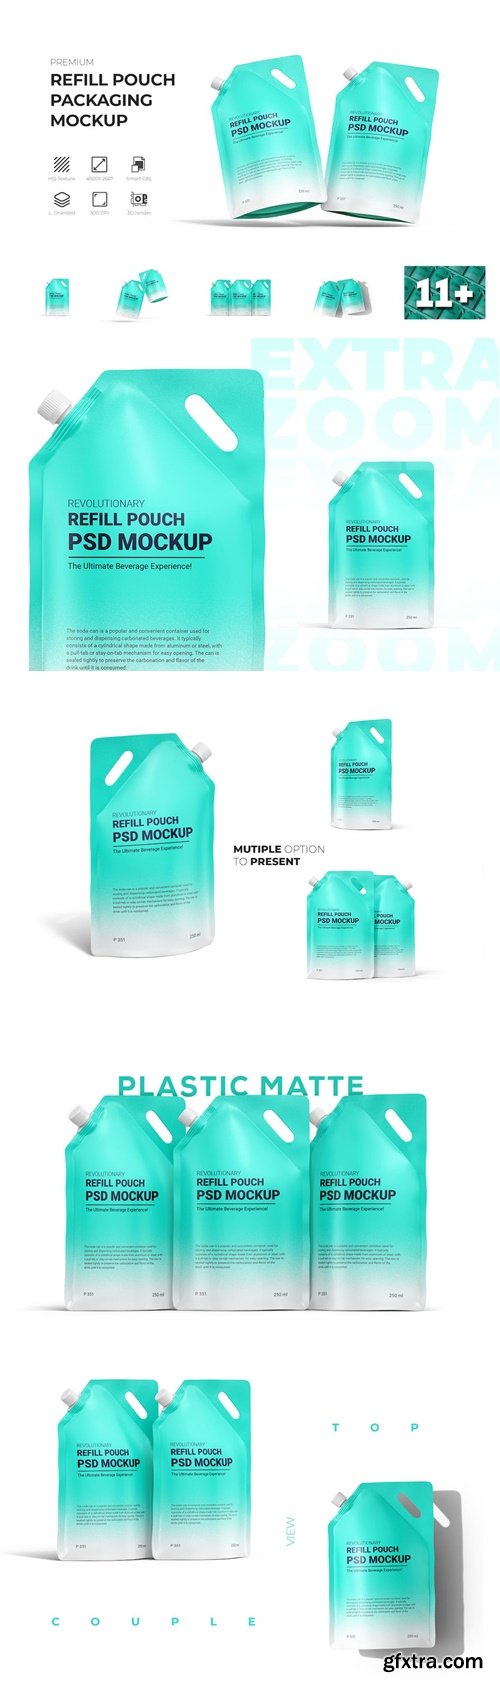 Refill Pouch Bag Mockup ZXUXNR8